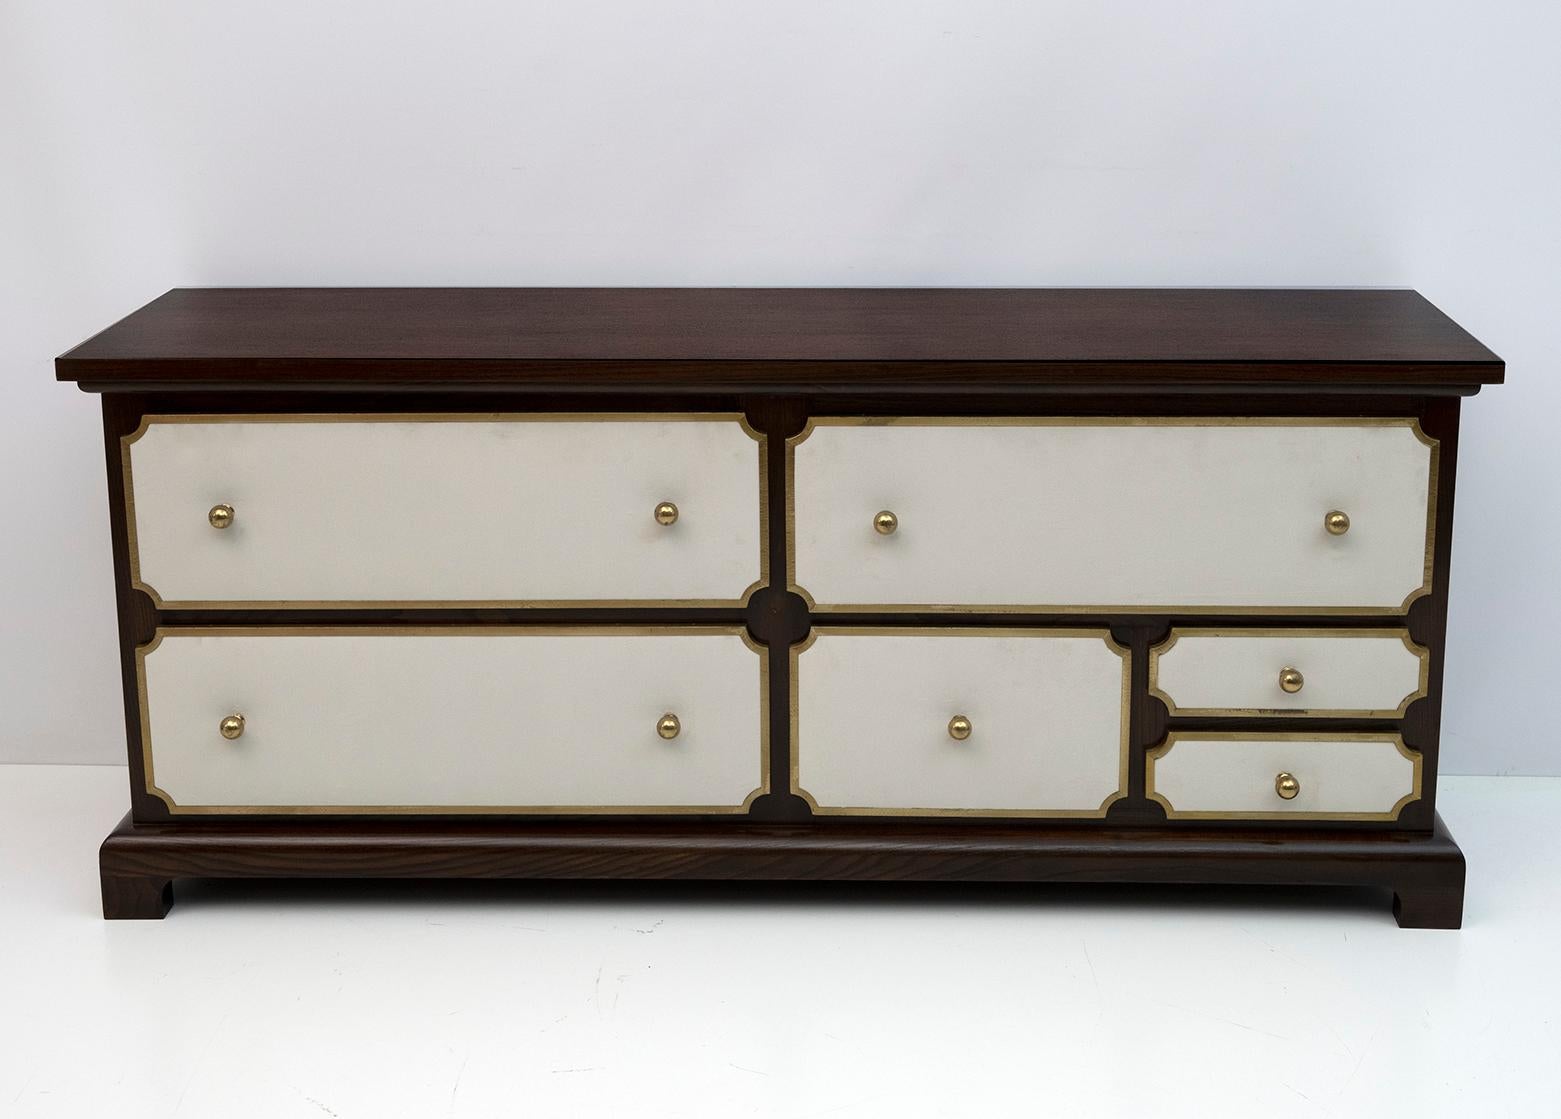 Chest of drawers designed by Luciano Frigerio in the 60s. In solid walnut, drawers with brass frames and ivory velvet upholstery, the chest of drawers has been completely restored and polished with shellac. The brass is in patina, as shown in the